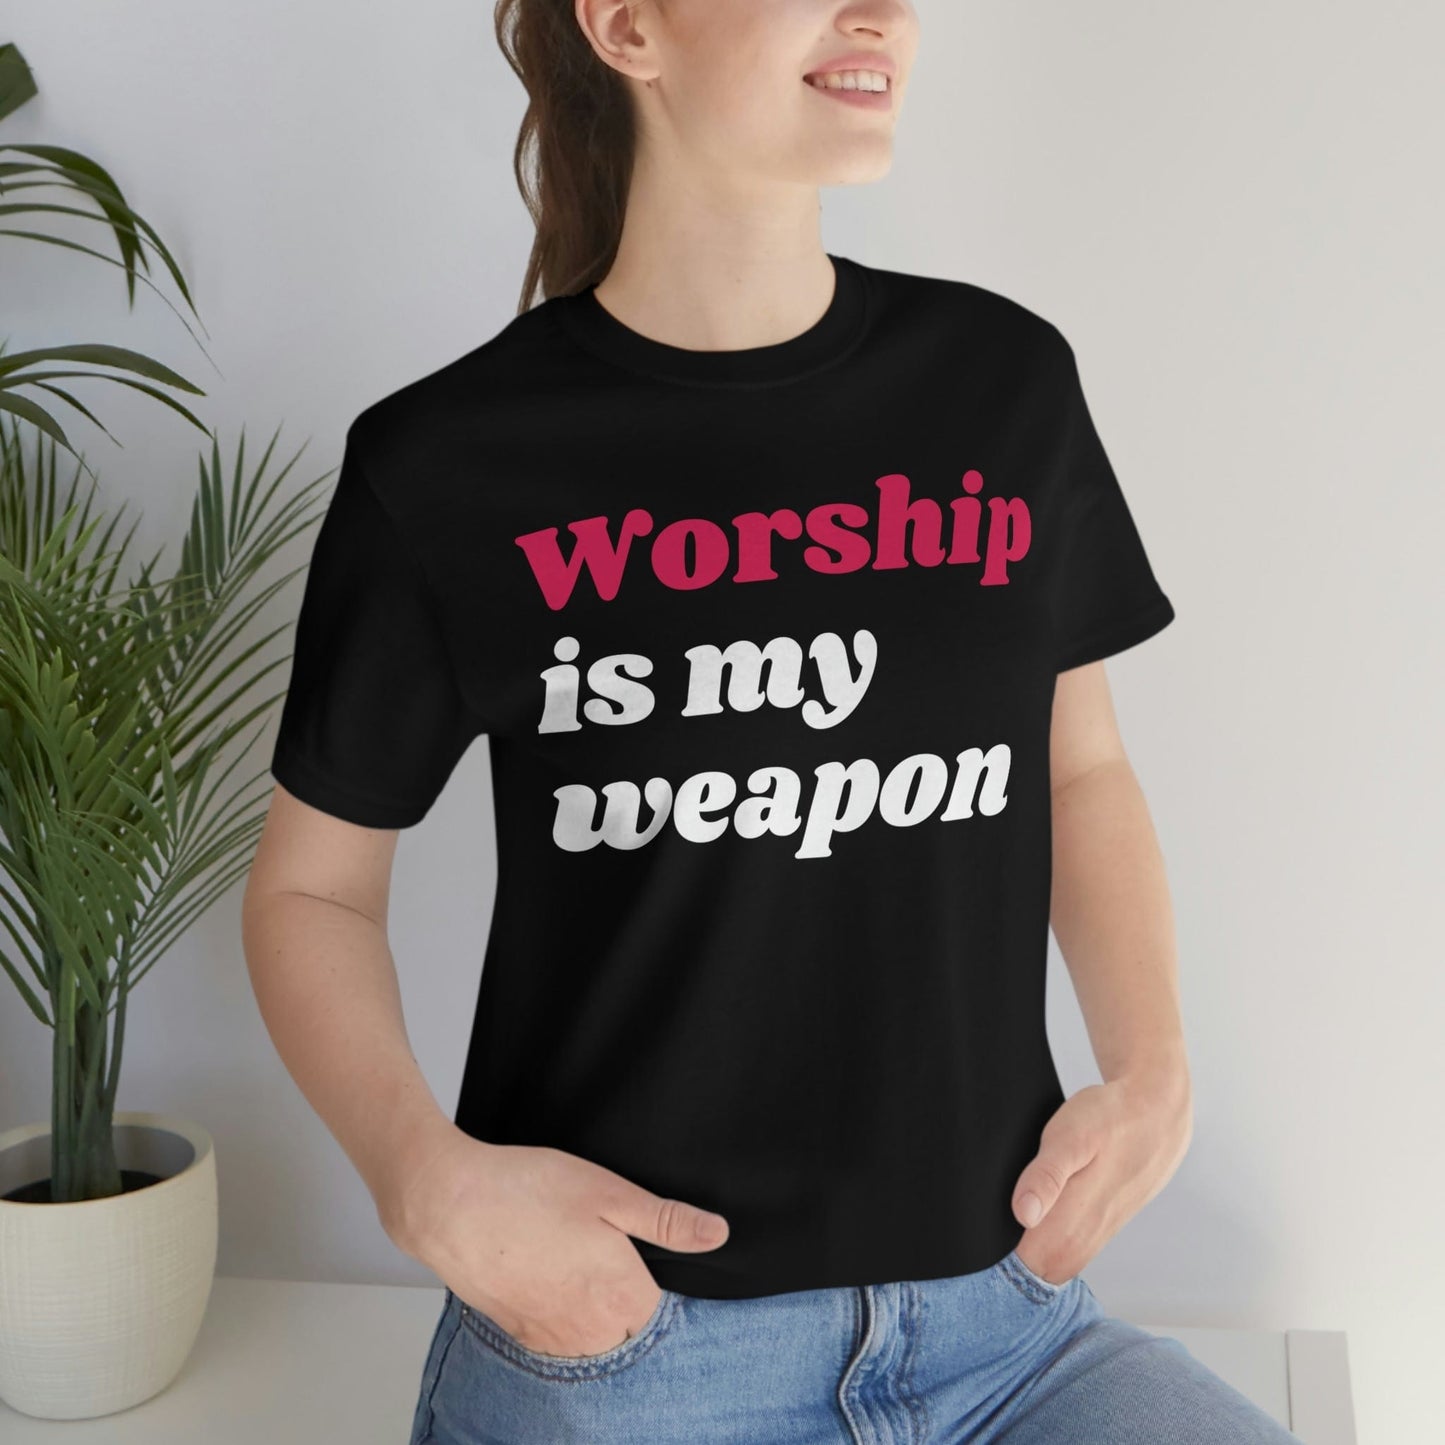 Worship Is My Weapon (Graphic Fuchsia & White Text) Unisex Jersey Short Sleeve Tee - Style: Bella+Canvas 3001